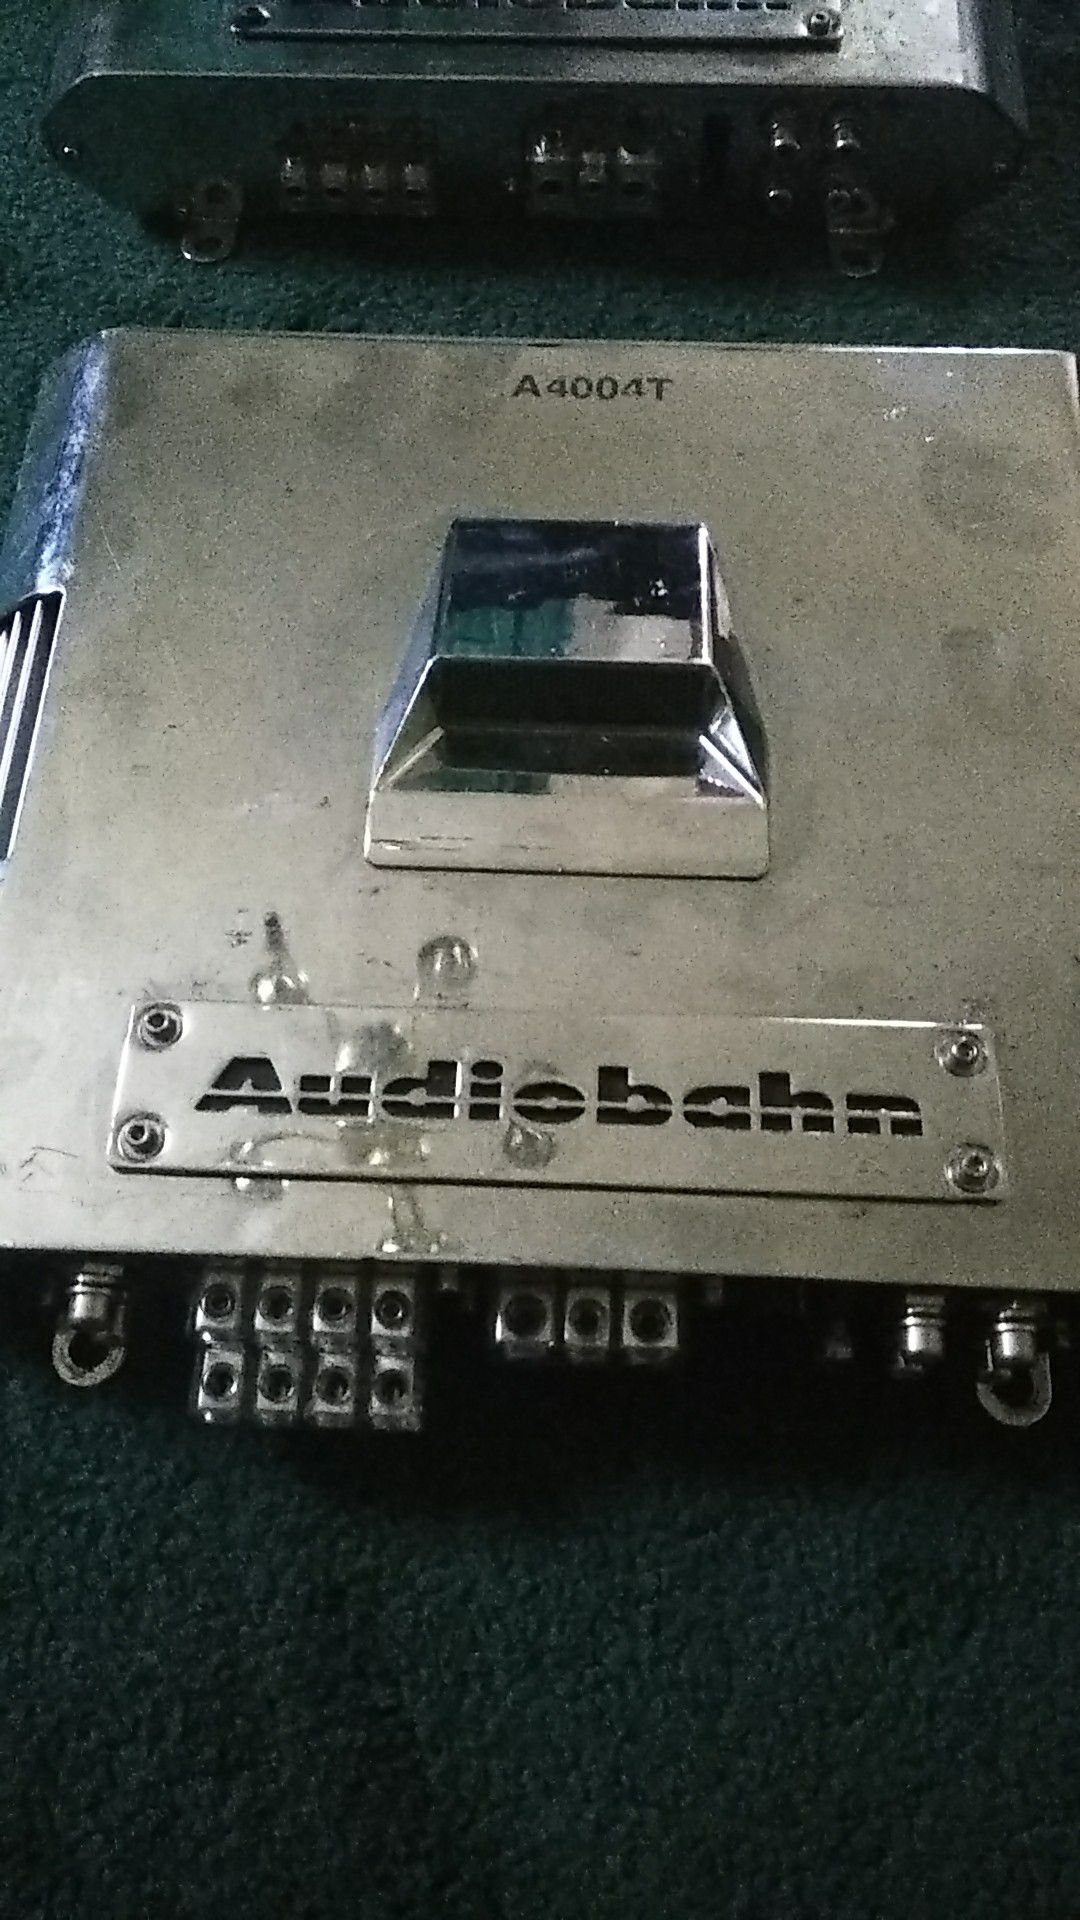 2 AUDIOBAHN A4004T INTAKE SERIES 800 WATT PEAK AND 400 WATT RMS 4 CHANNEL  CAR AMPLIFIER WITH BUILT IN CROSSOVERS, BUILT IN FAN, AND THE LATEST  FEATURE for Sale in Youngstown, OH - OfferUp